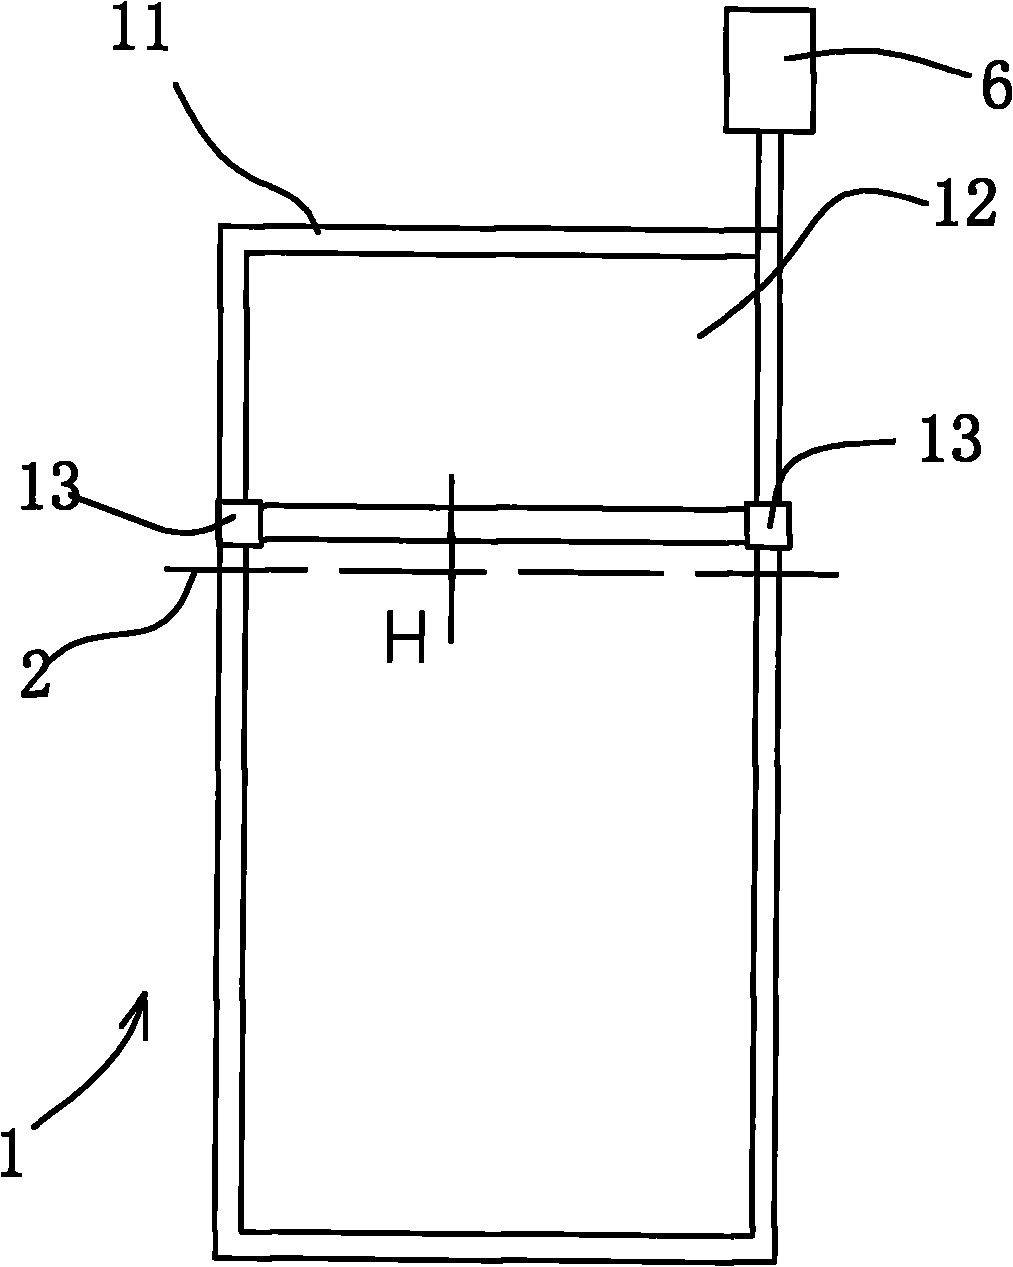 Blade system of vertical axis wind turbine